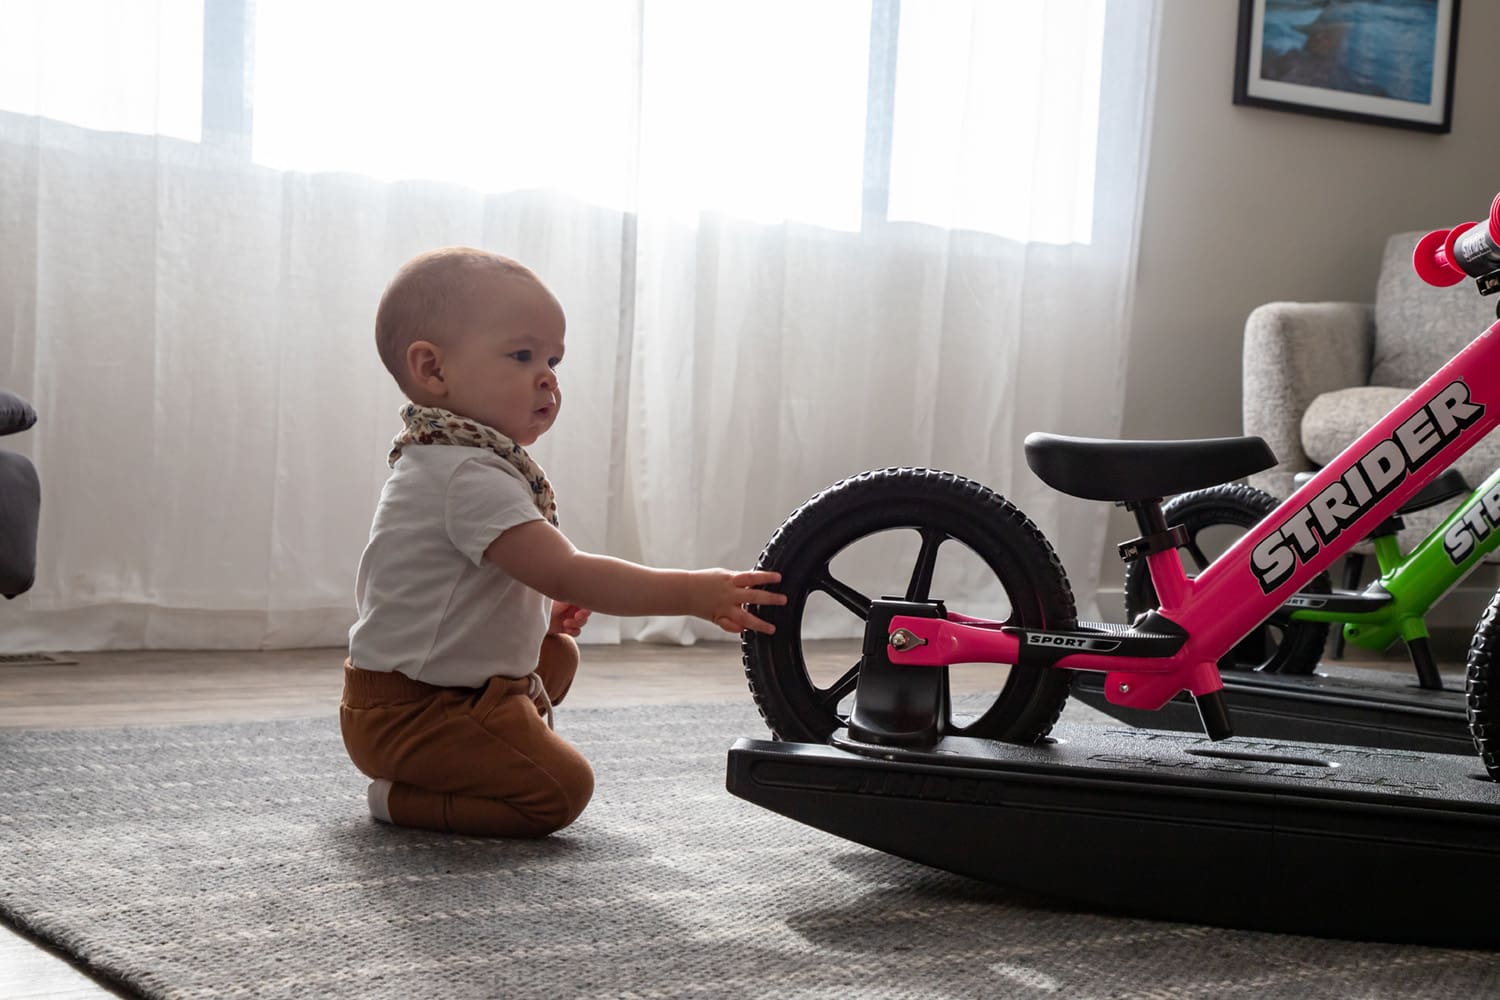 A baby checks out the wheel of a pink Strider Sport Rocking Bike